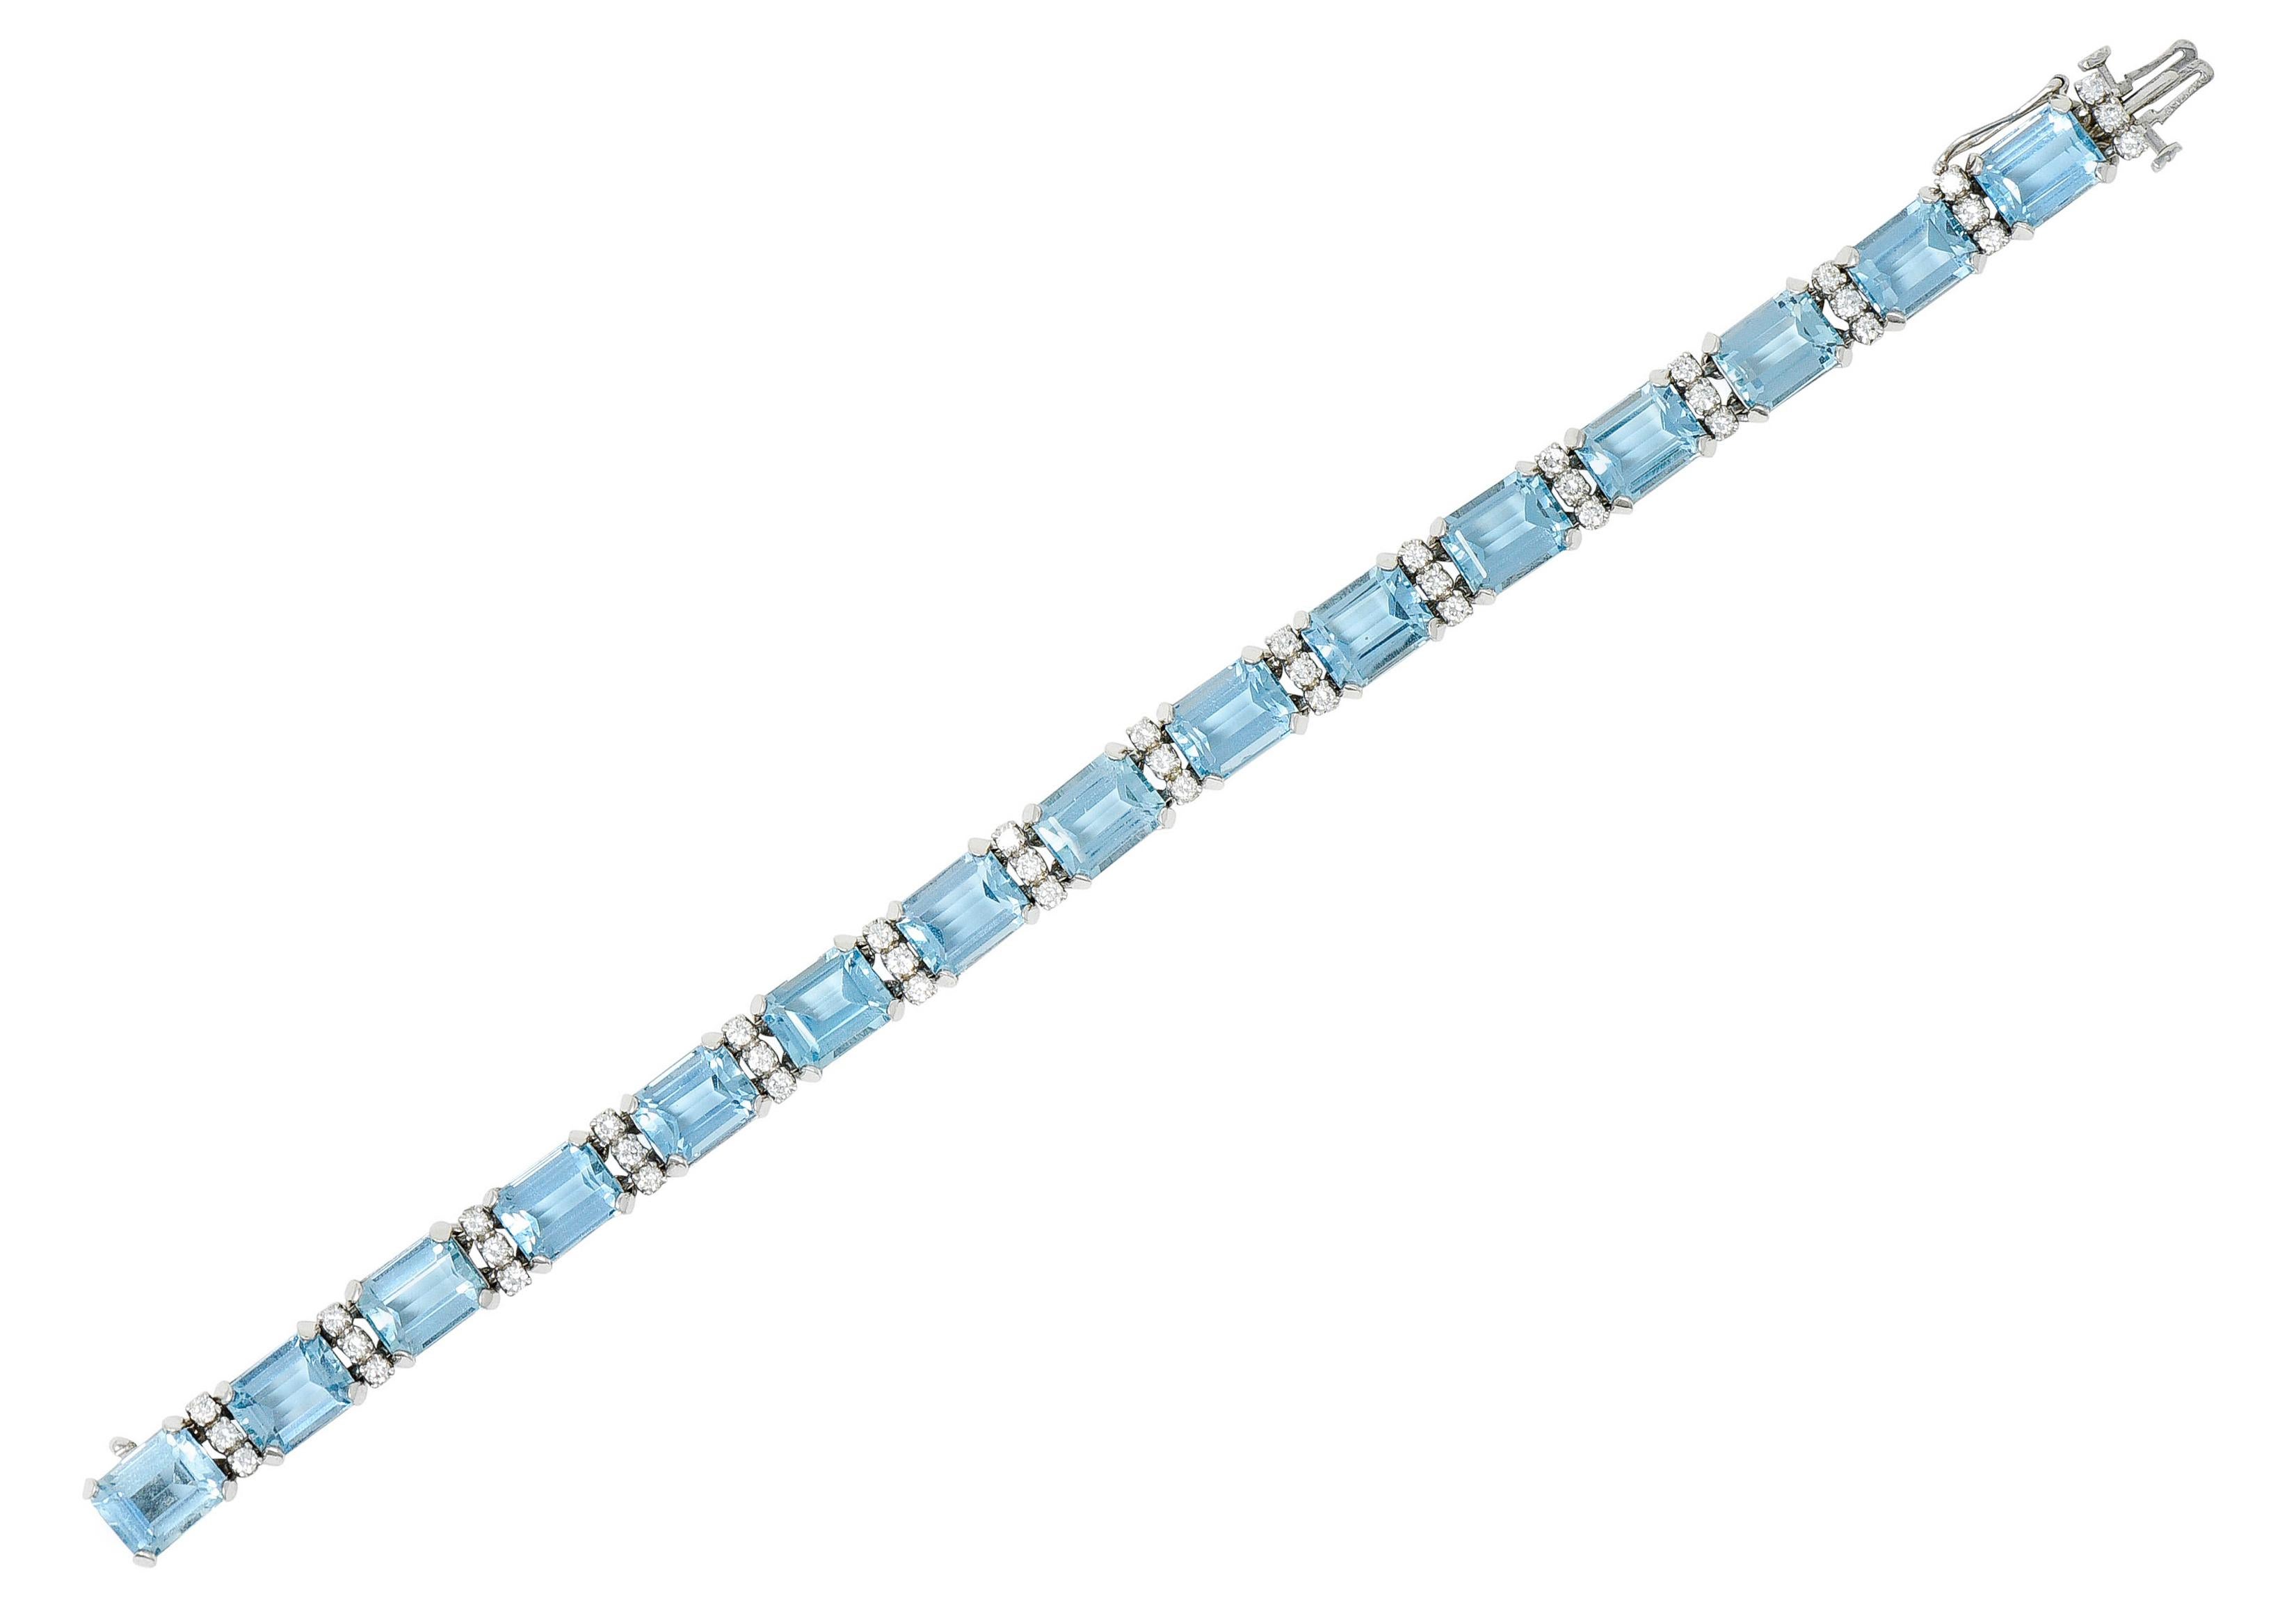 Link bracelet is comprised of emerald cut aquamarines weighing in total approximately 32.00 carats

Extremely eye clean with medium light greenish blue color - very well matched

Set by wide prongs and alternating with diamond spacer links

Round